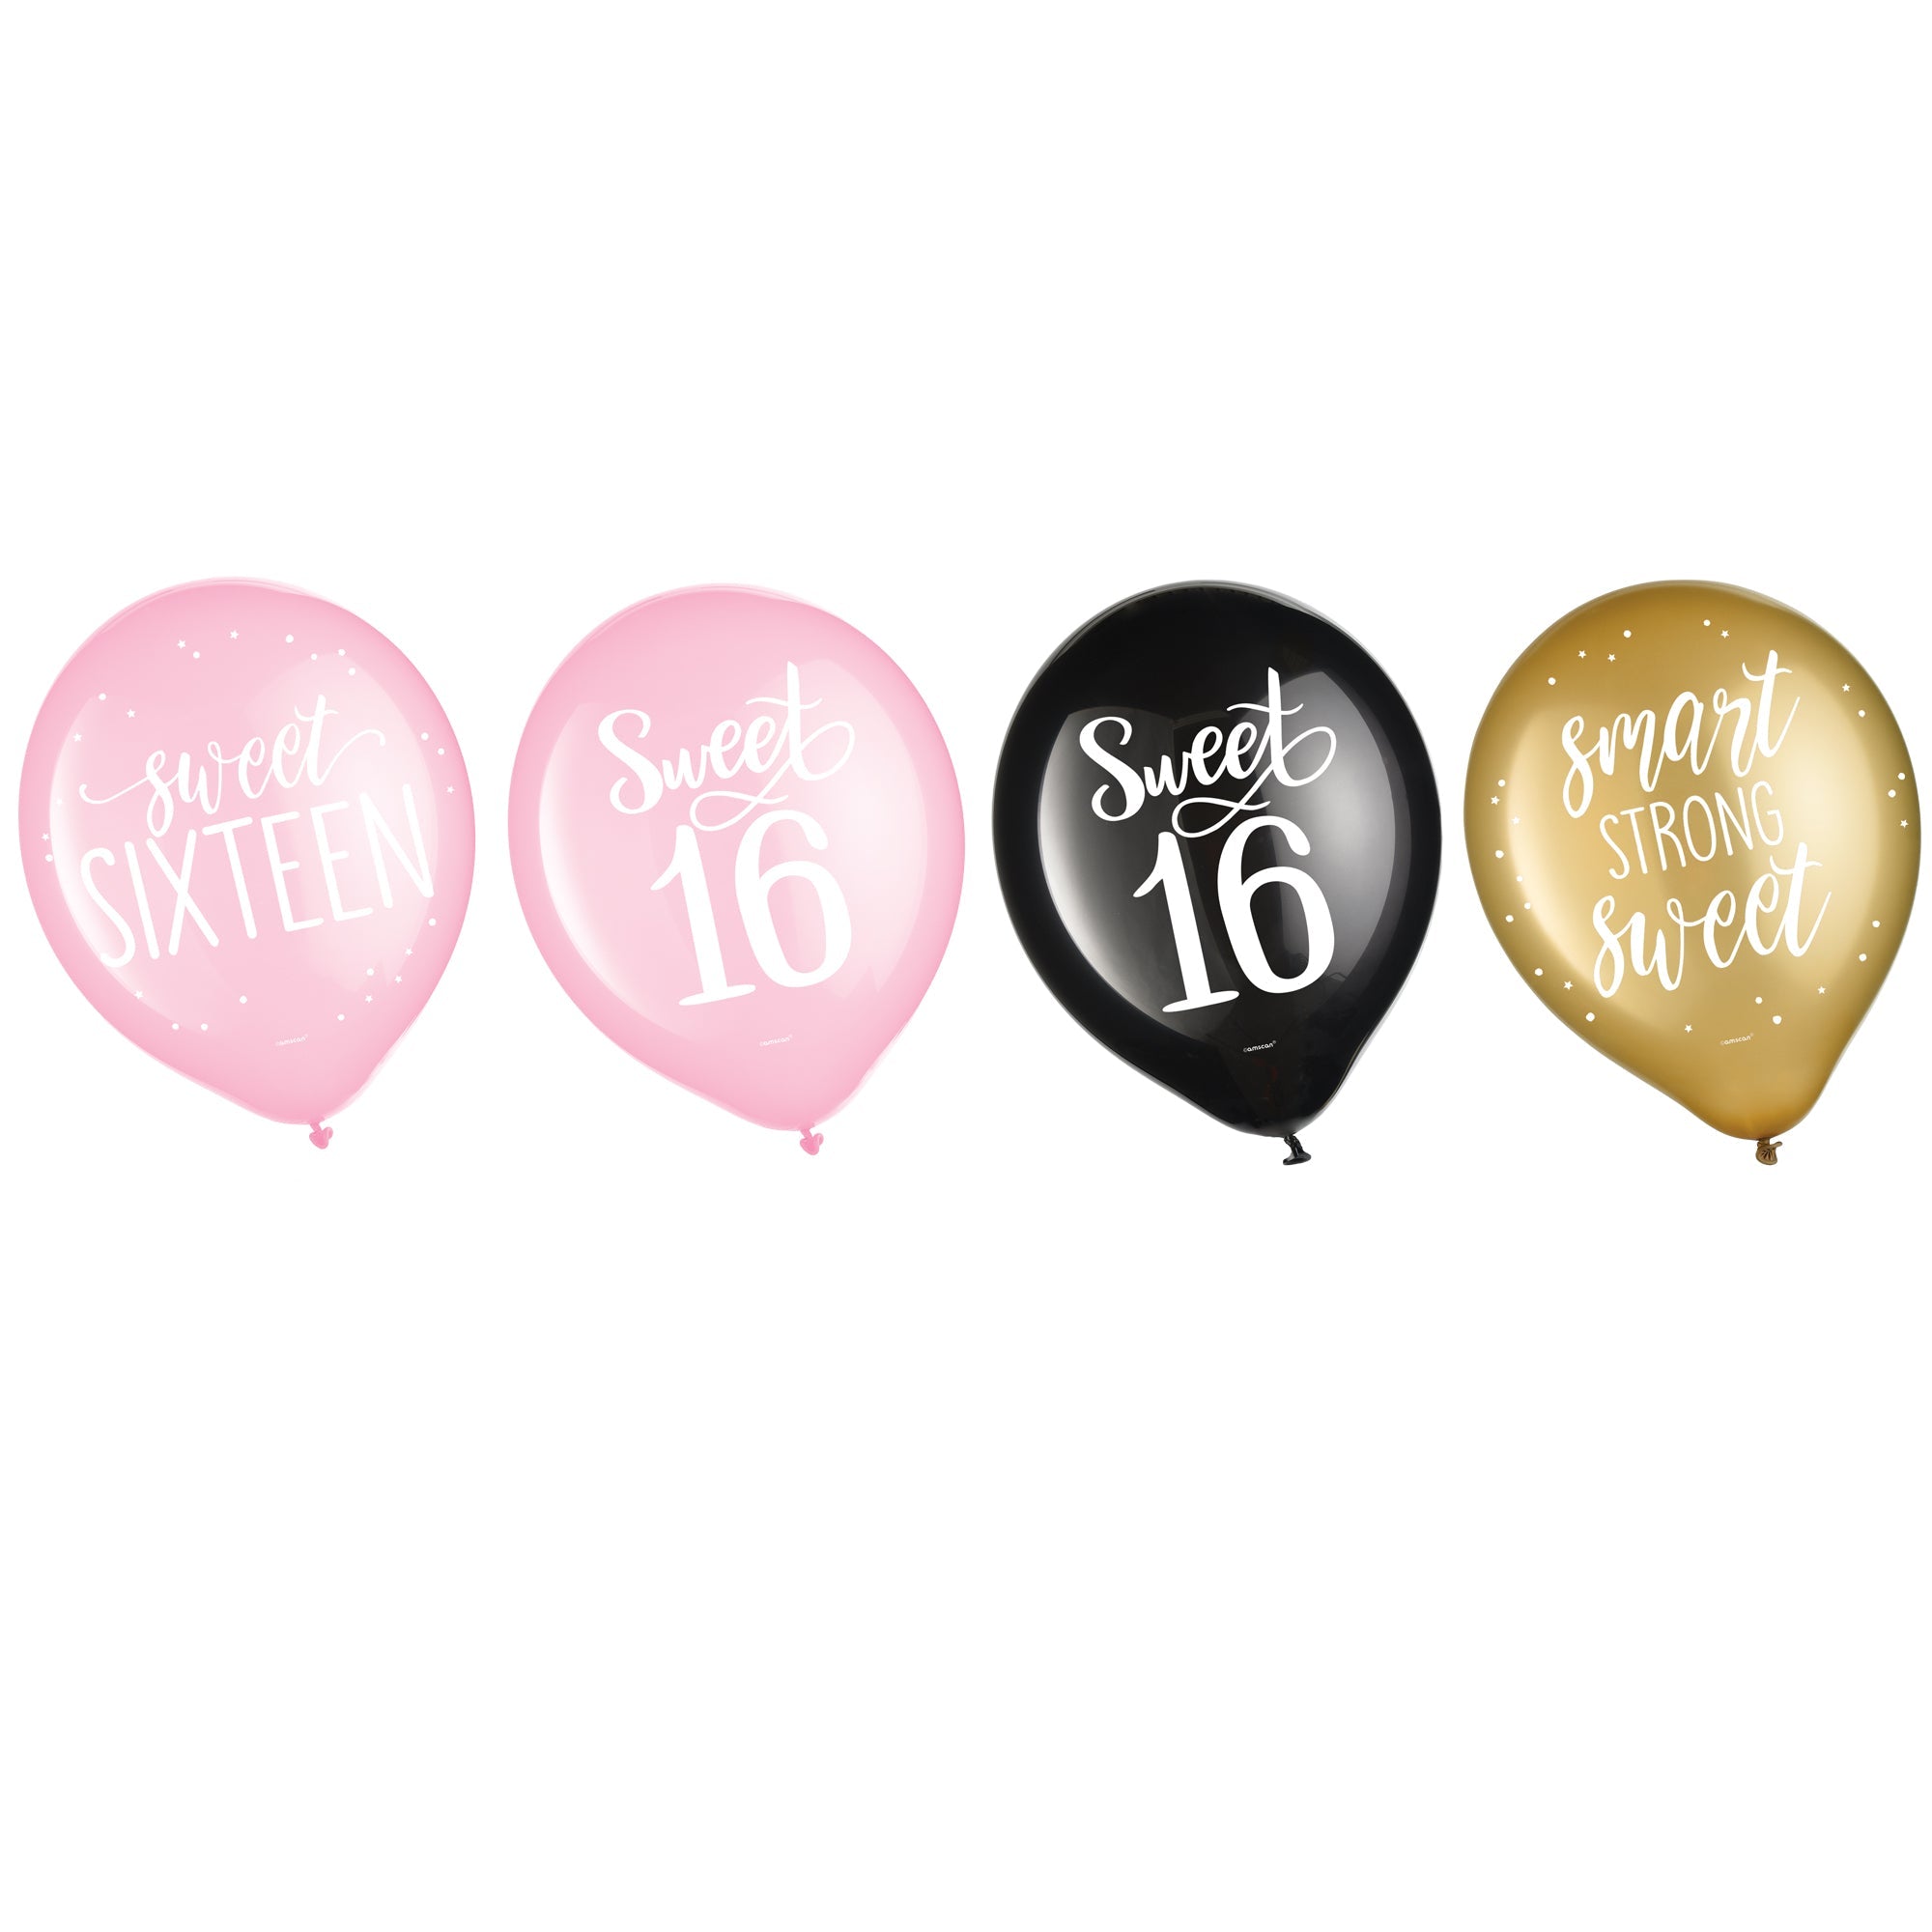 Sixteen Blush 15 Printed Latex Balloons  Asst. Colors 12in